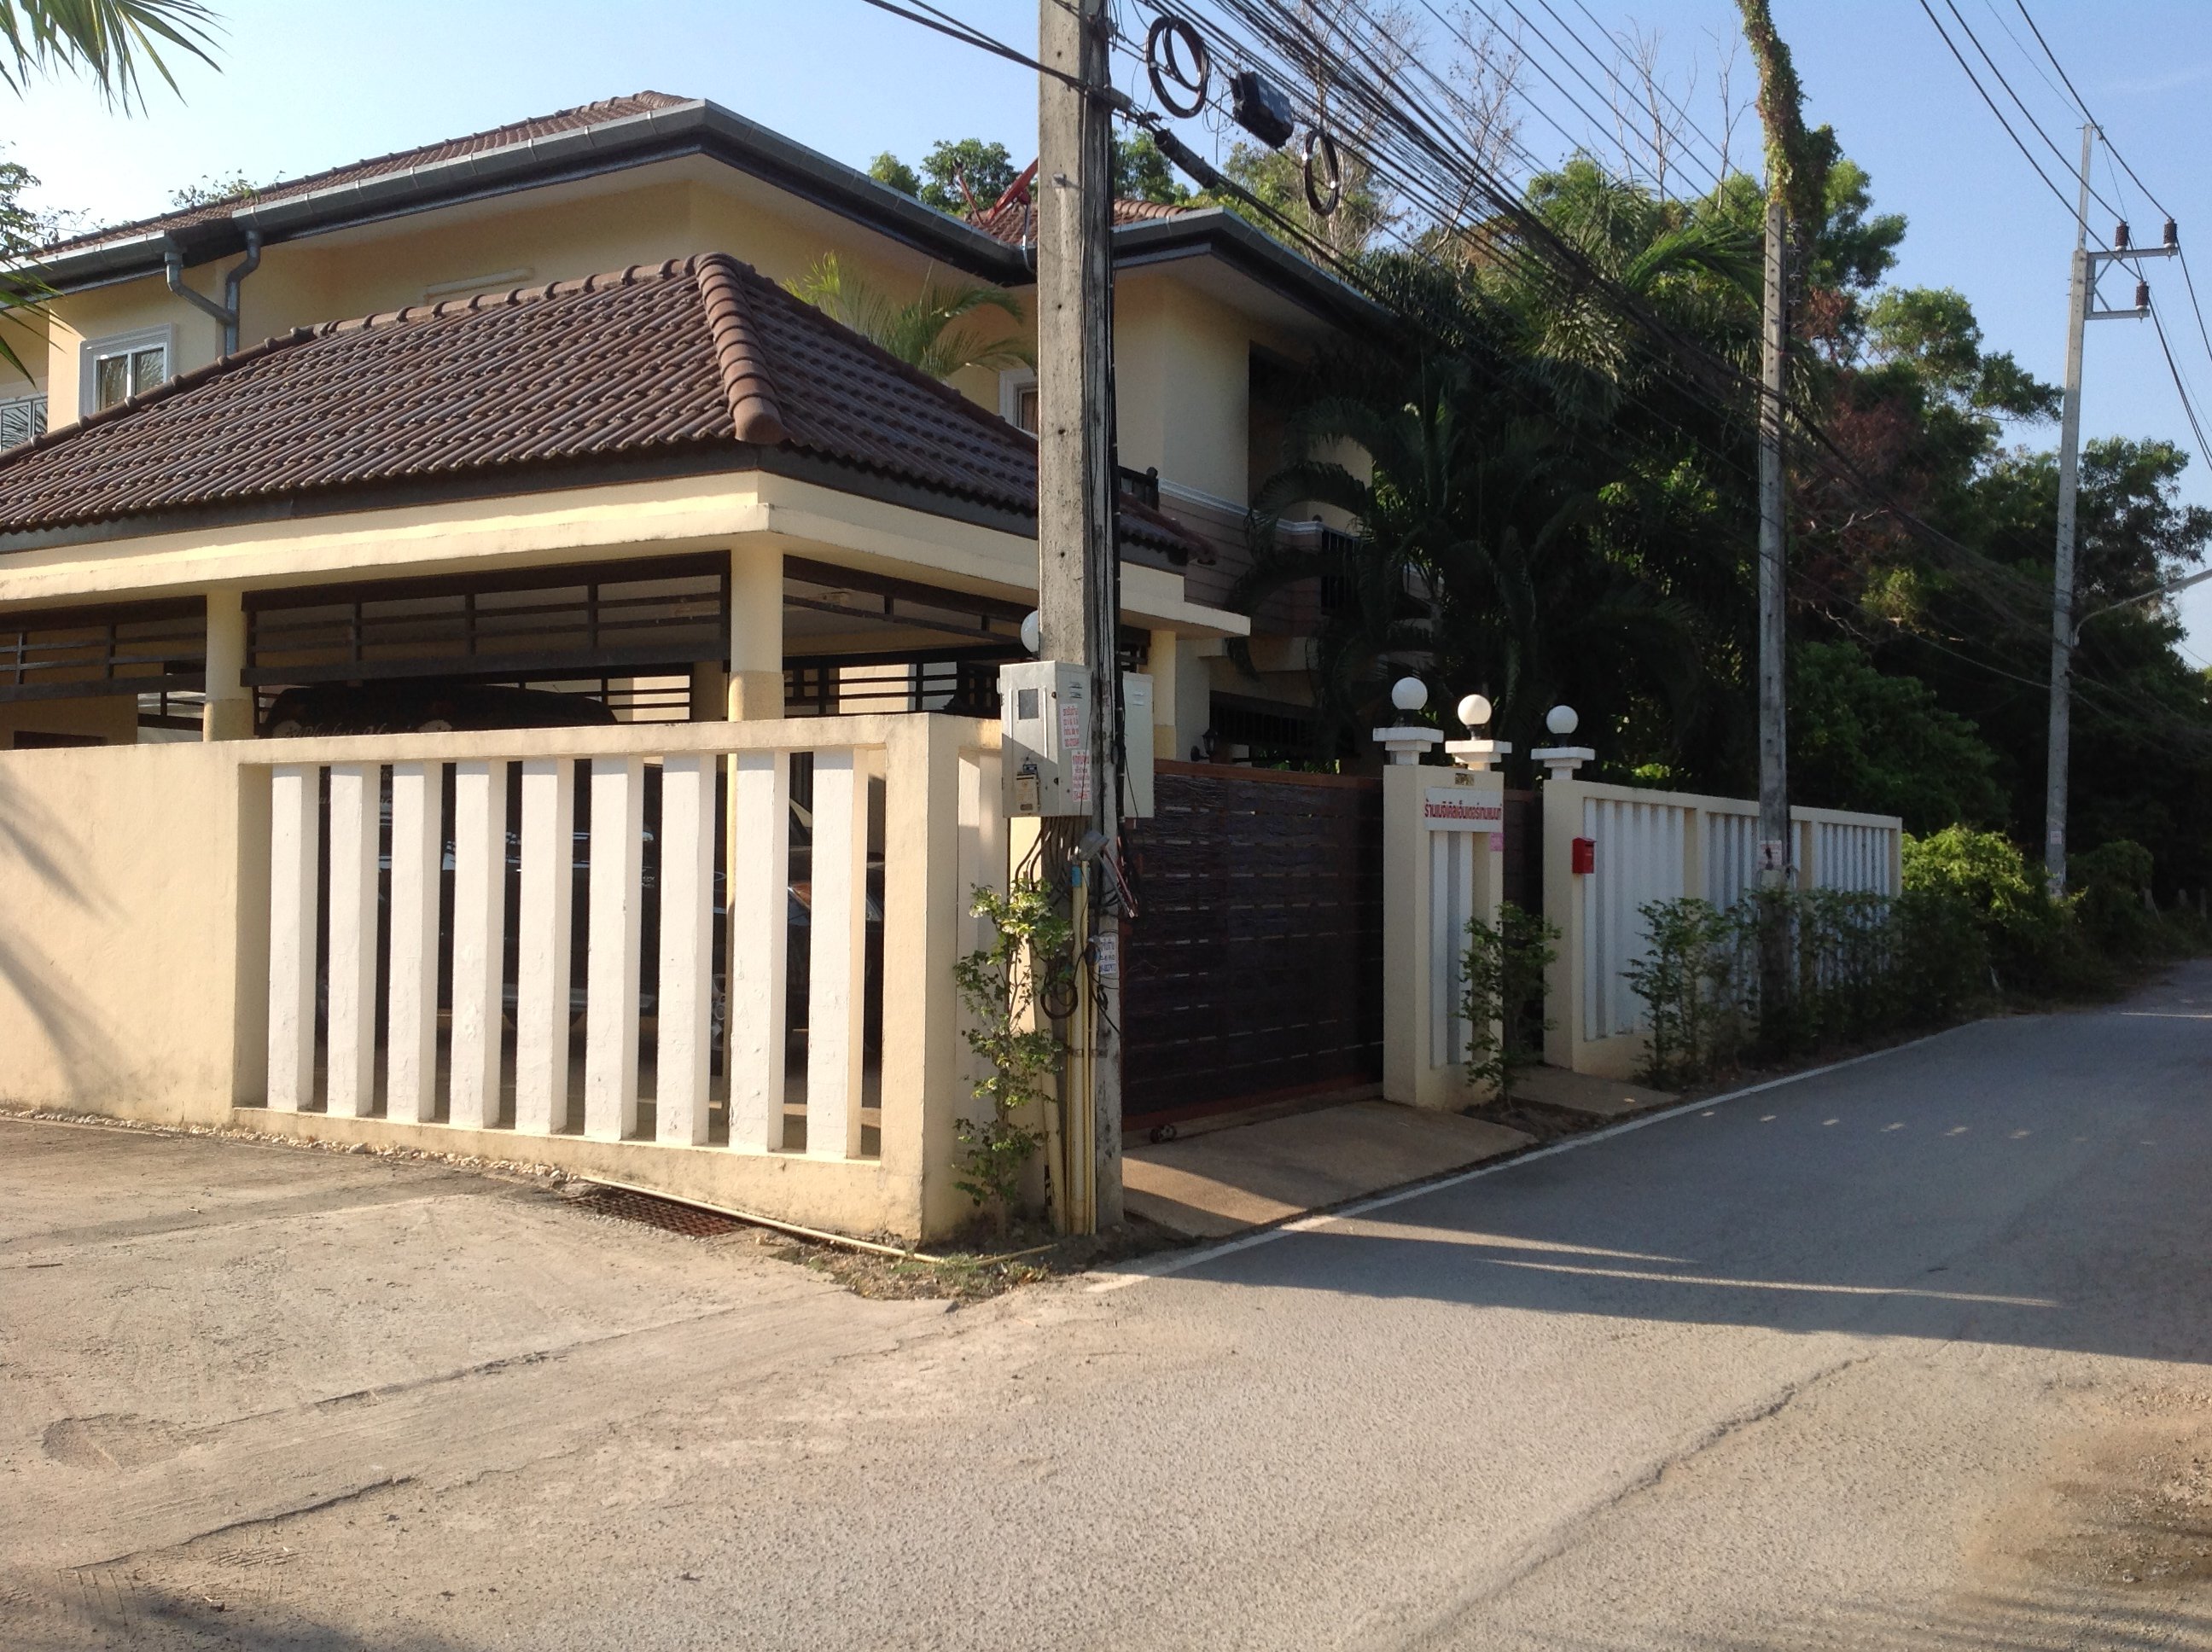 Family house in a very popular soi in Rawai Phuket